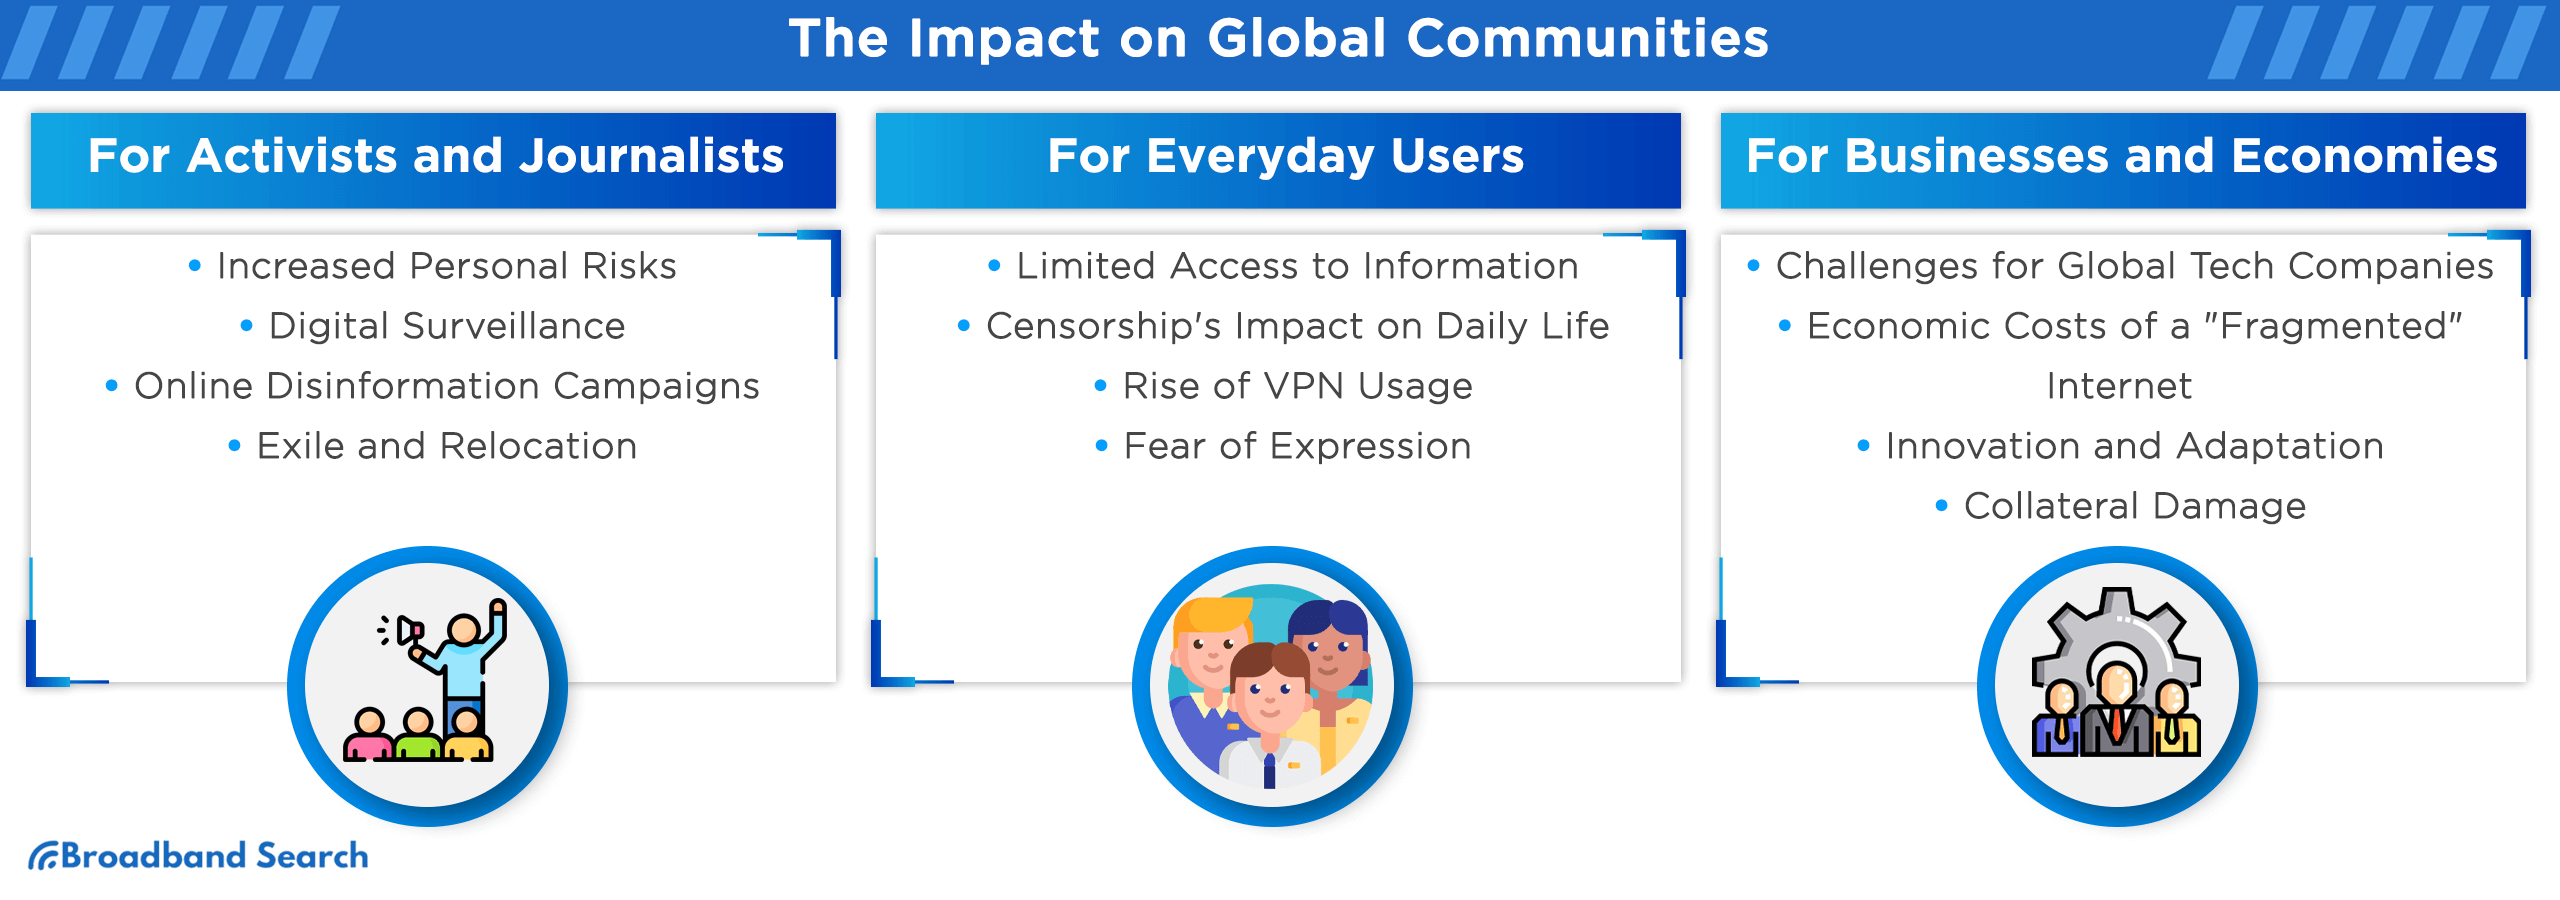 The impact of internet censorship on global communities